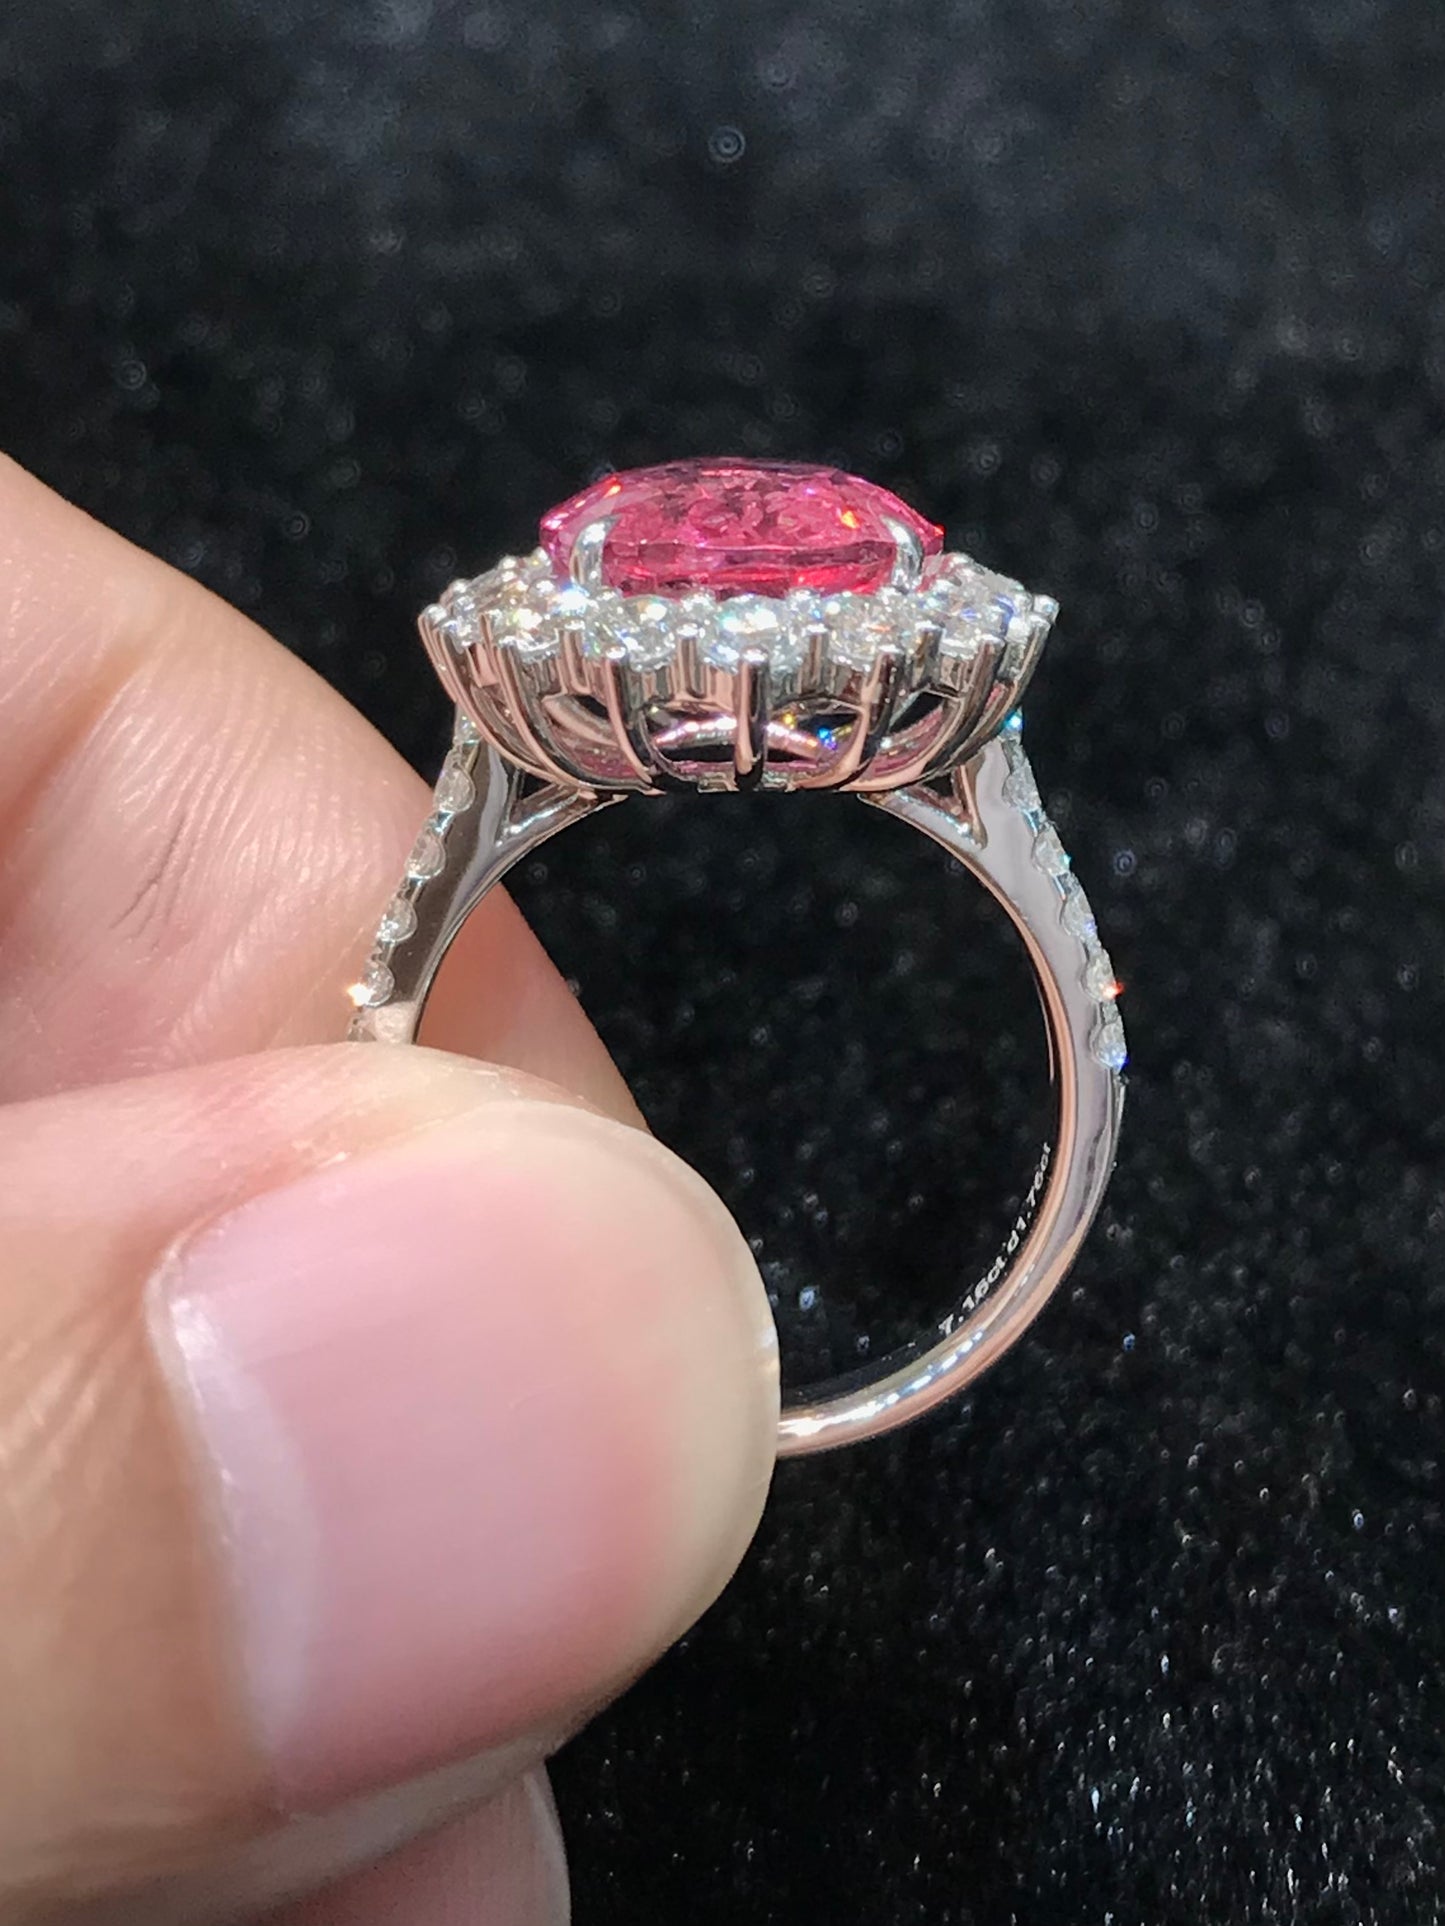 Natural Mahenge Pink Spinel 7.16ct Ring Set With Natural Diamonds 1.76ct In 18K White Gold Gemstone Fine Jewellery